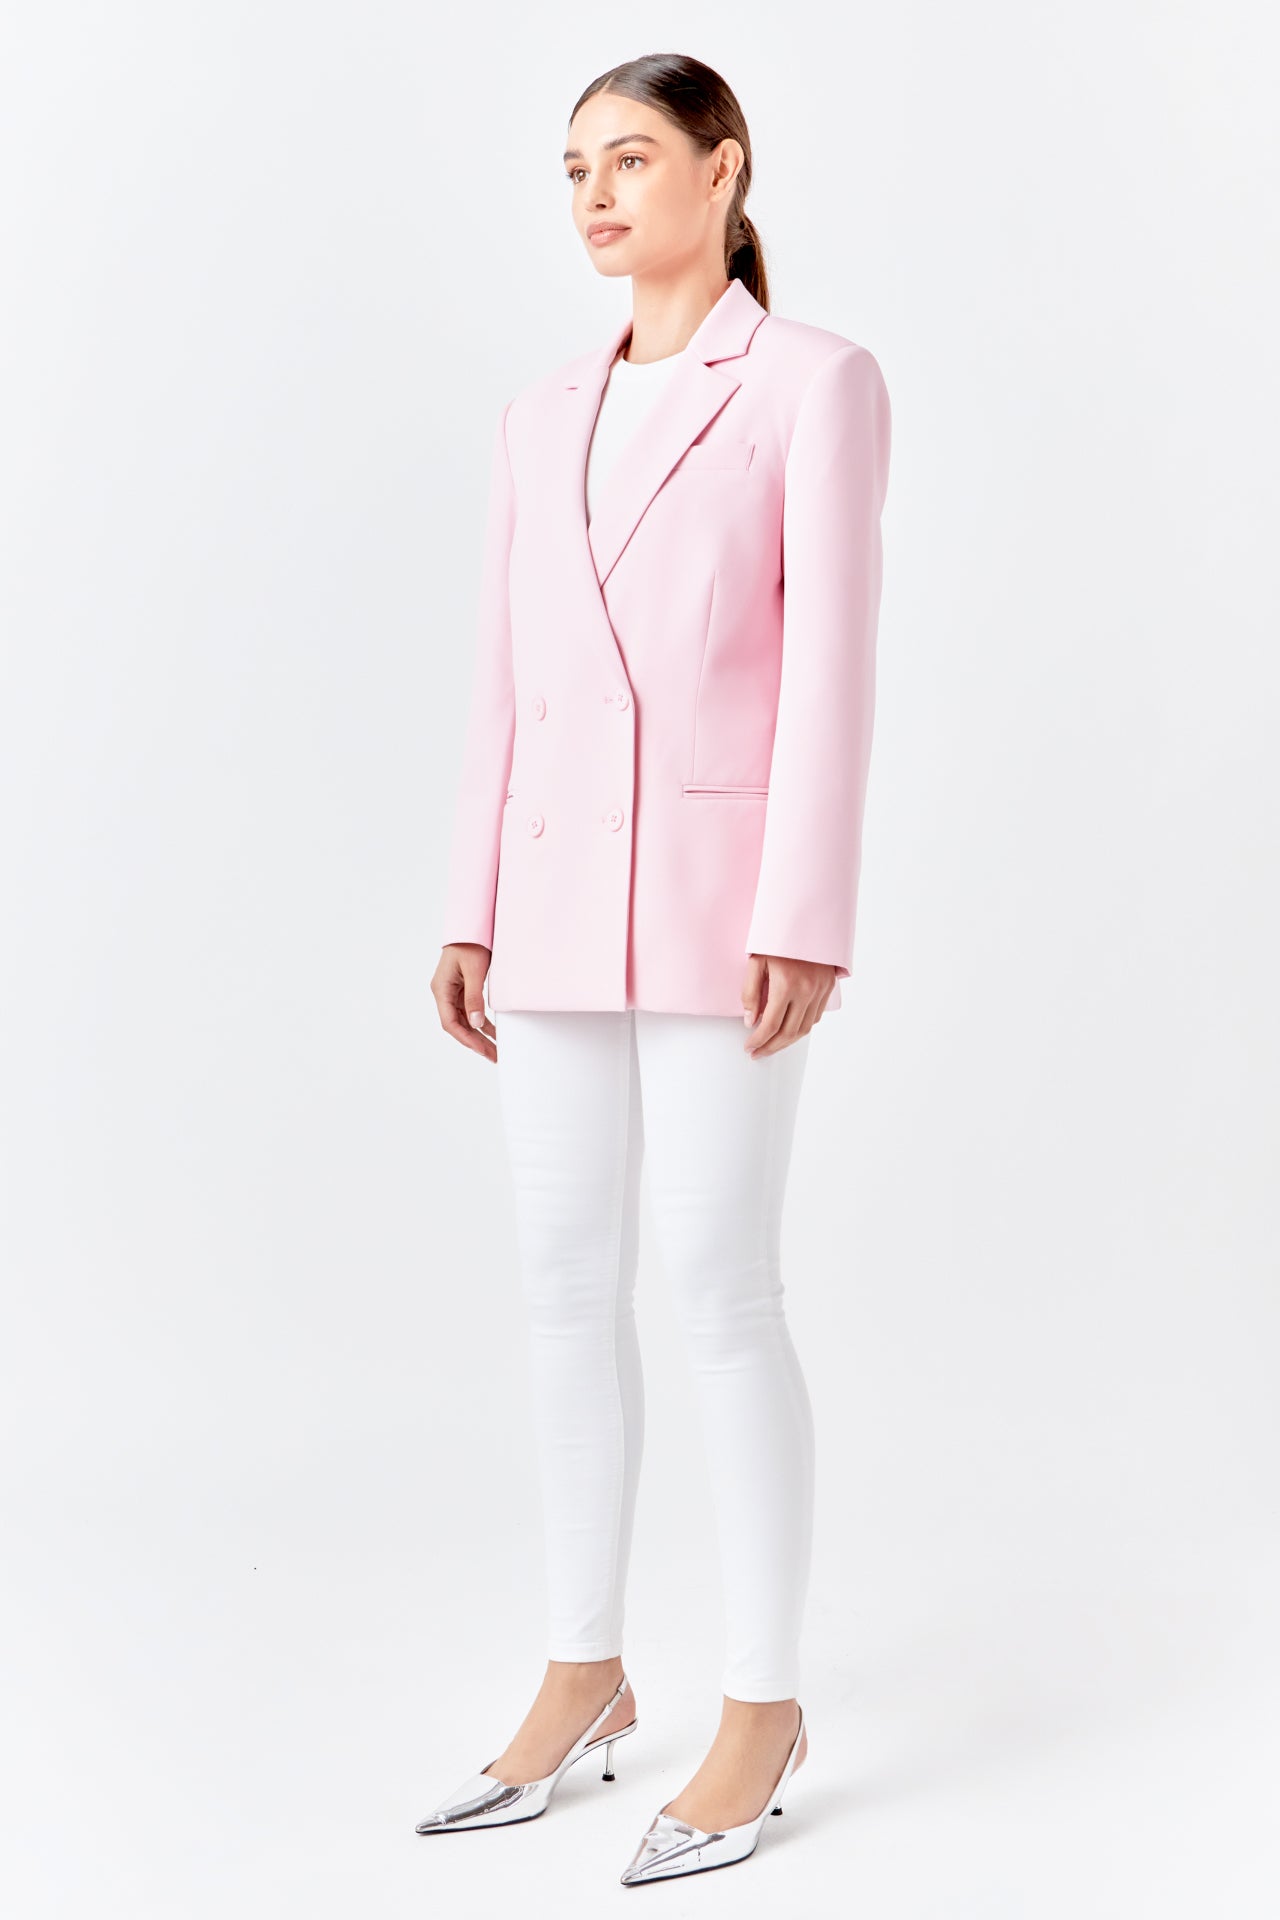 ENDLESS ROSE - Double Breast Basic Blazer - BLAZERS available at Objectrare